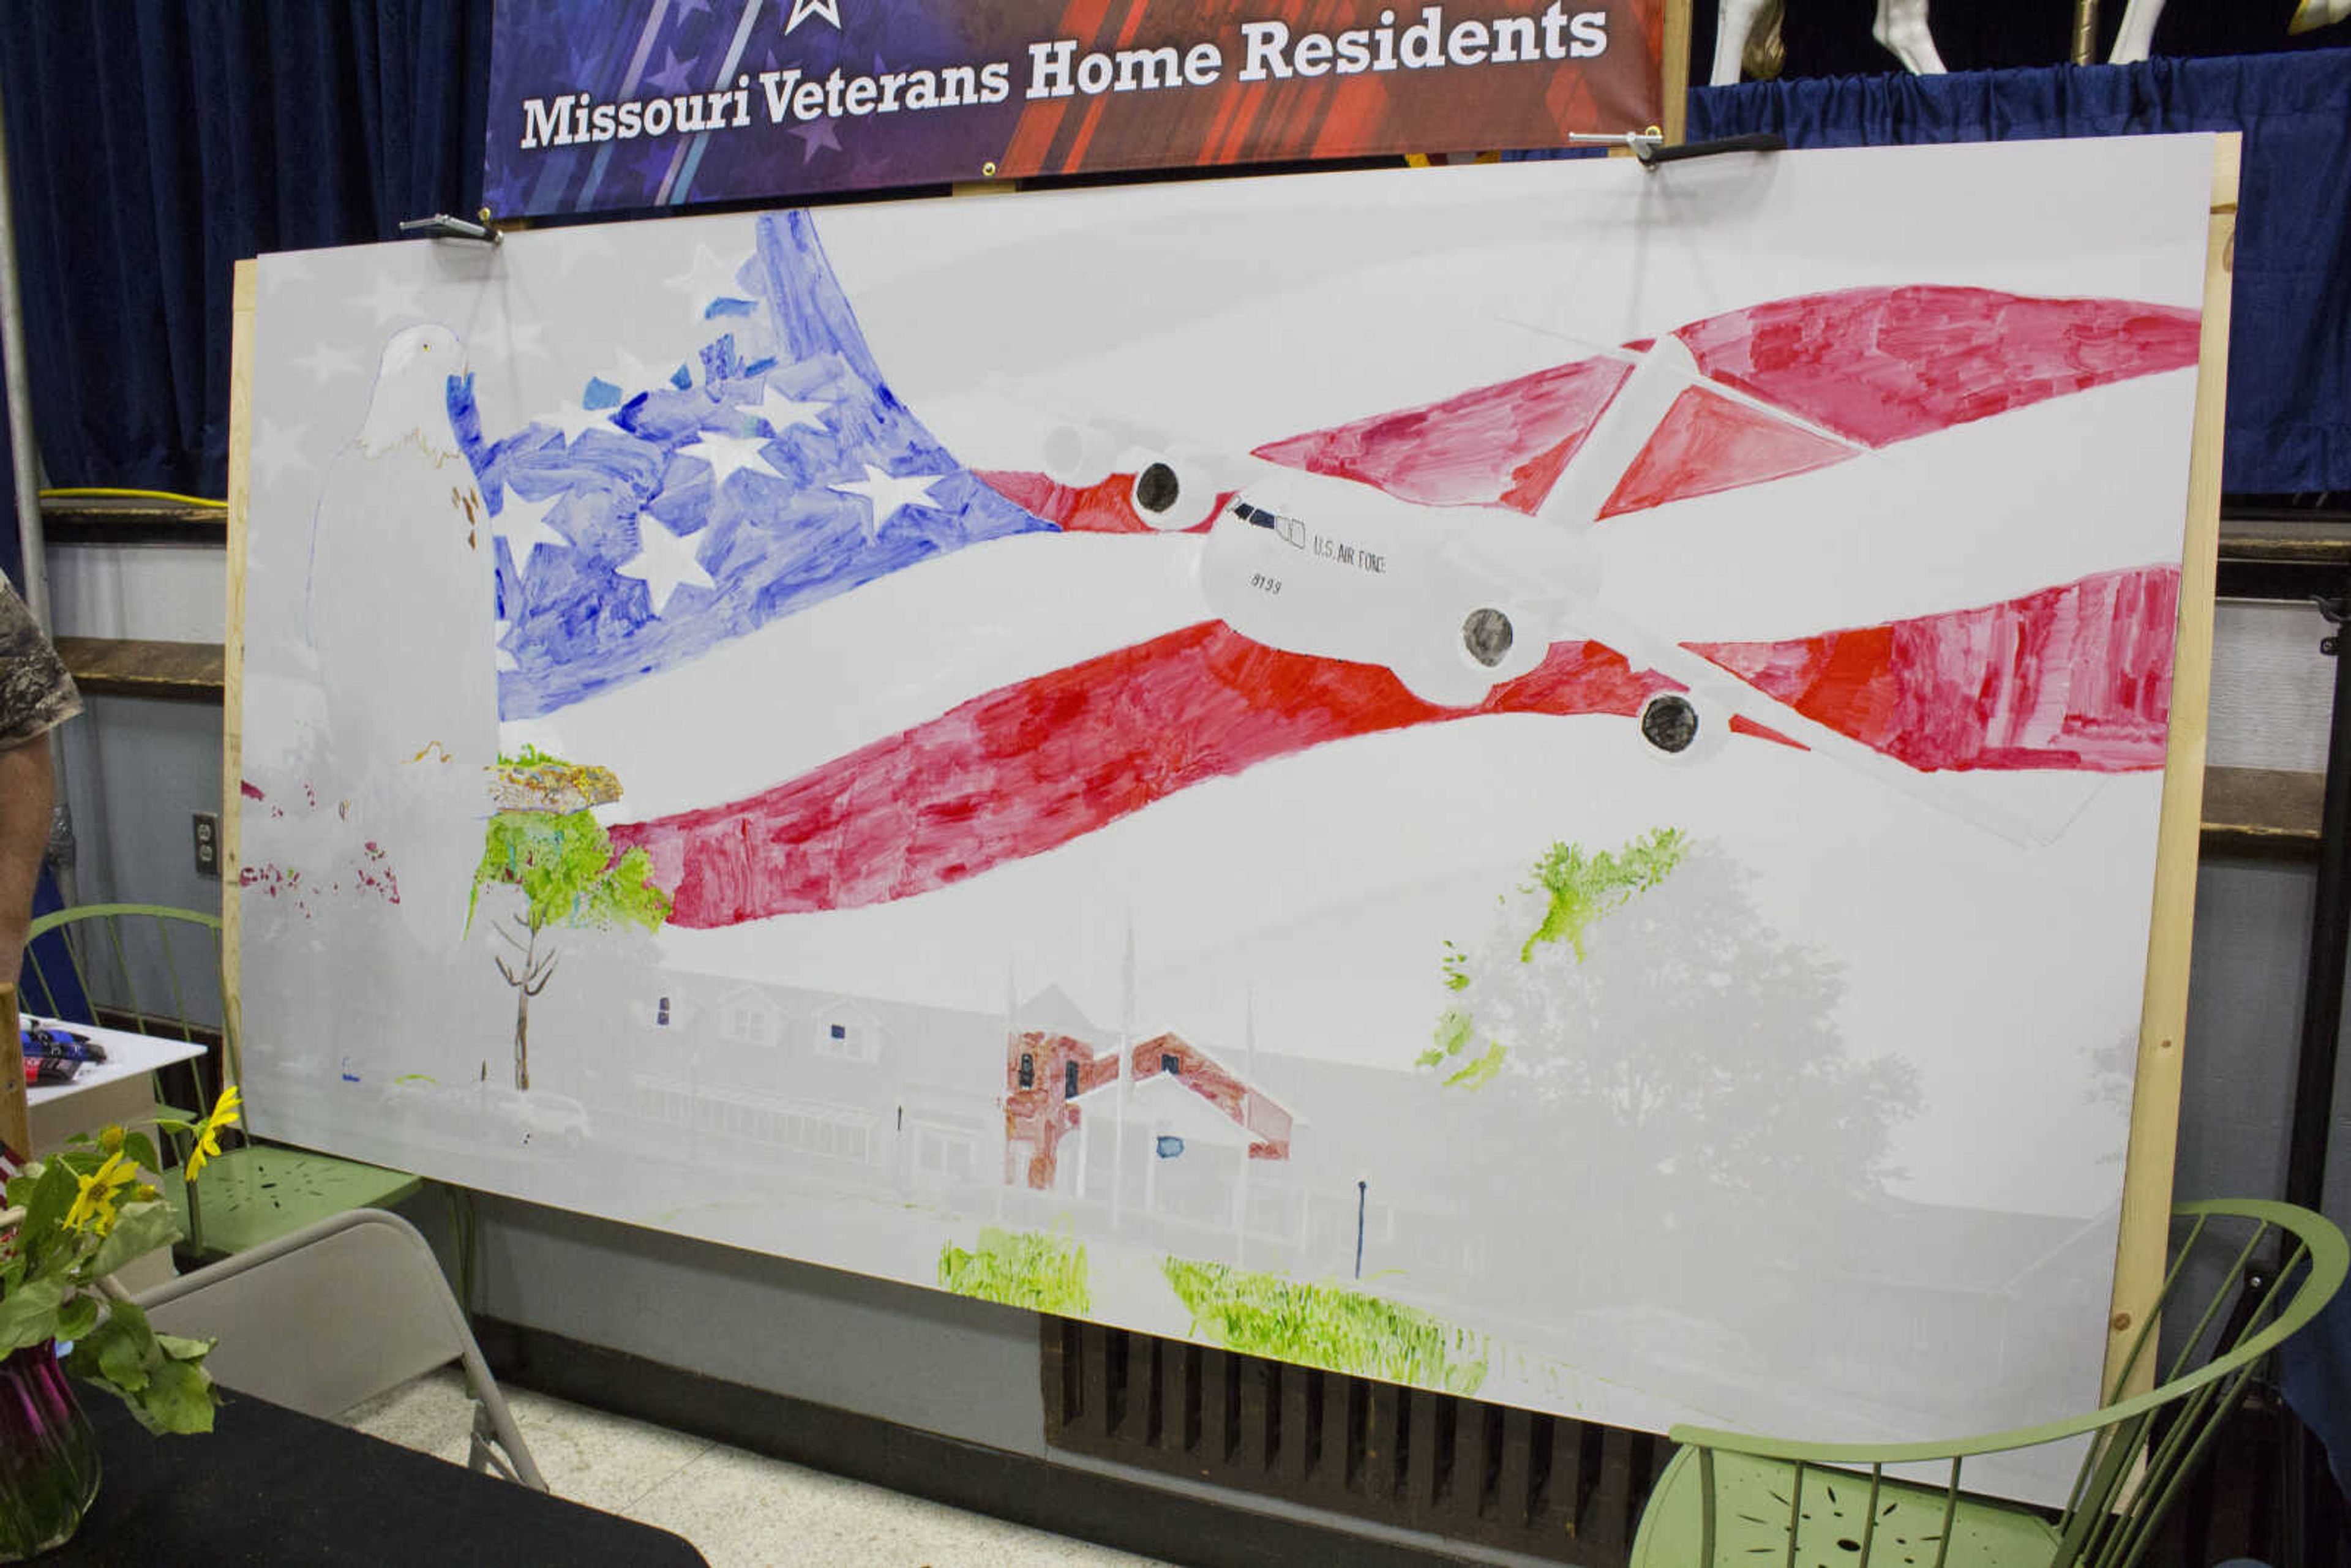 The process of the patriotic mural with over 500 collaborating citizens’ contributions.